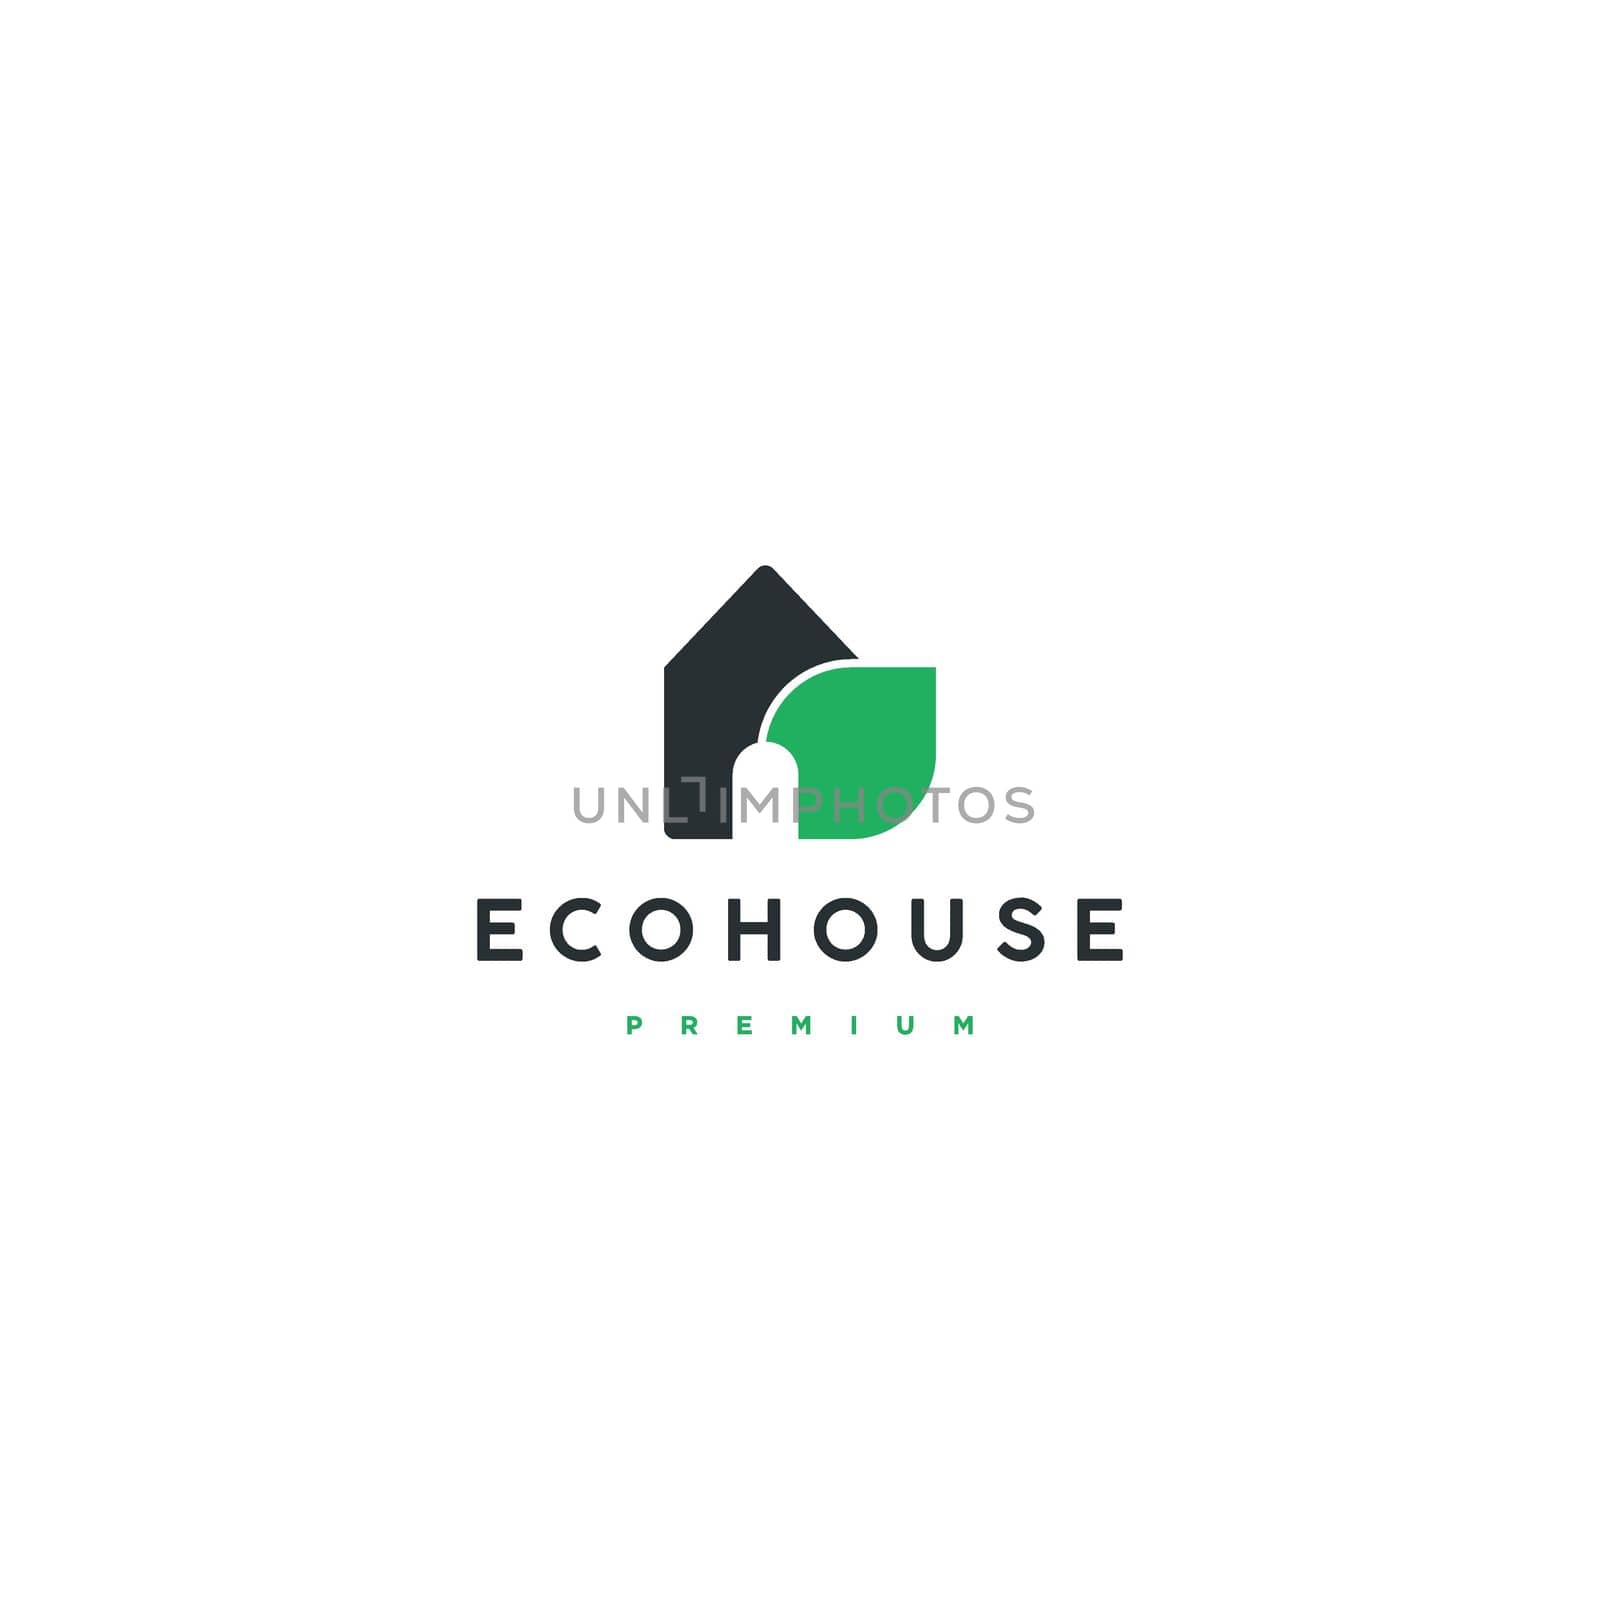 simple house with leaf logo. nature home vector icon stock illustration by IreIru